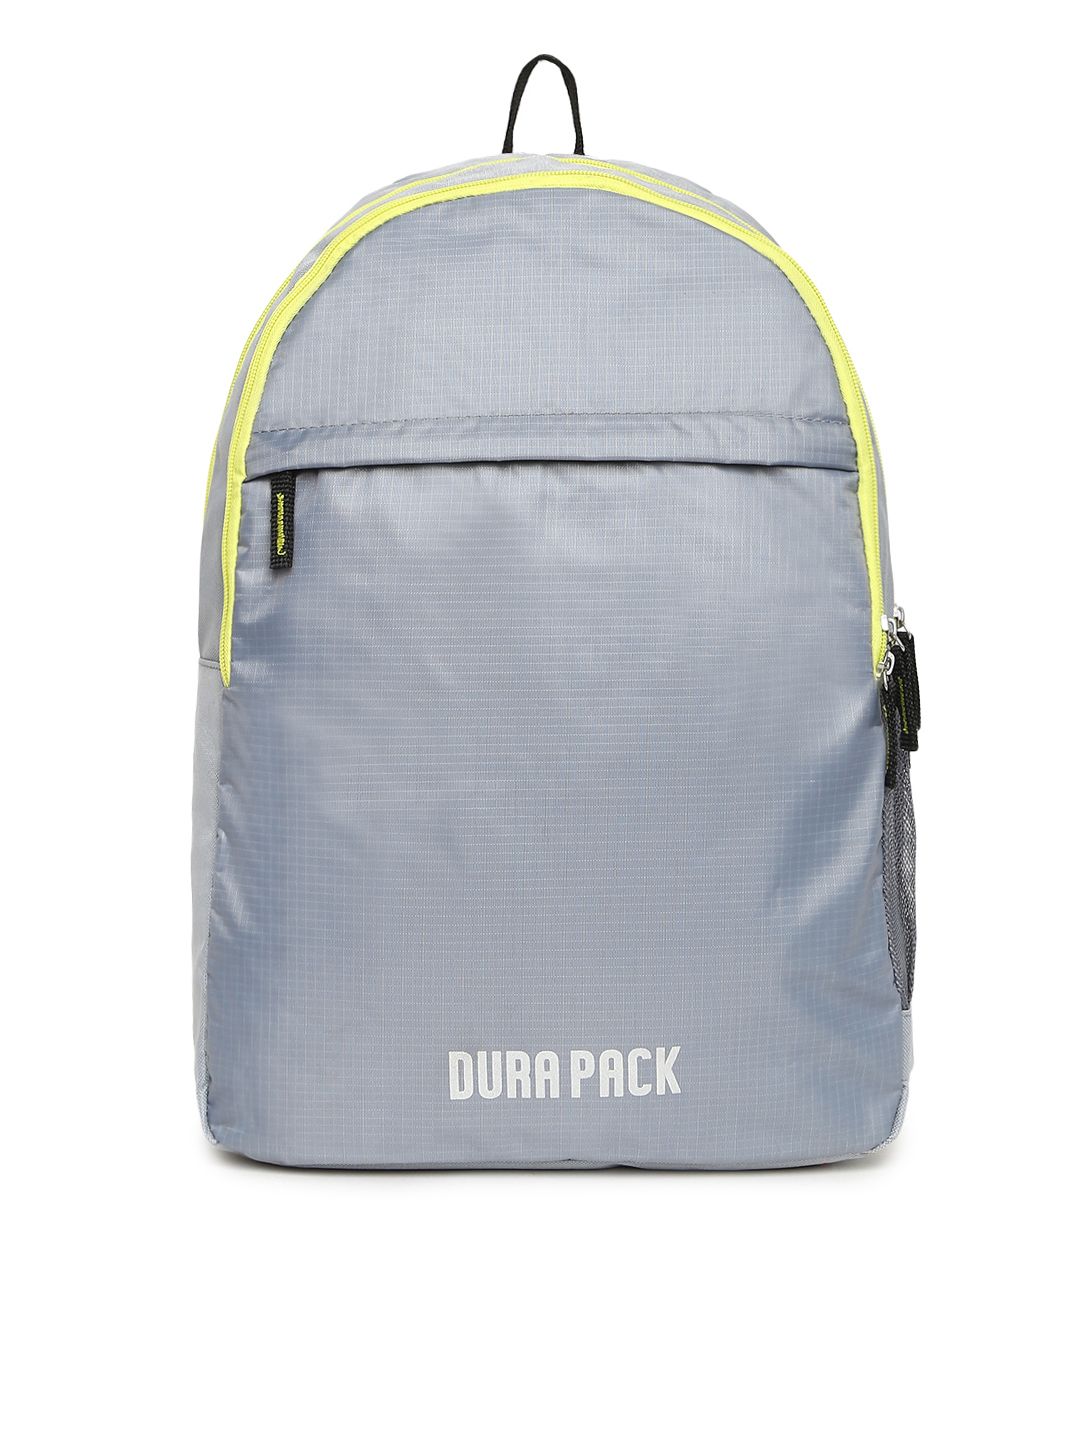 Durapack Unisex Grey Solid Backpack Price in India